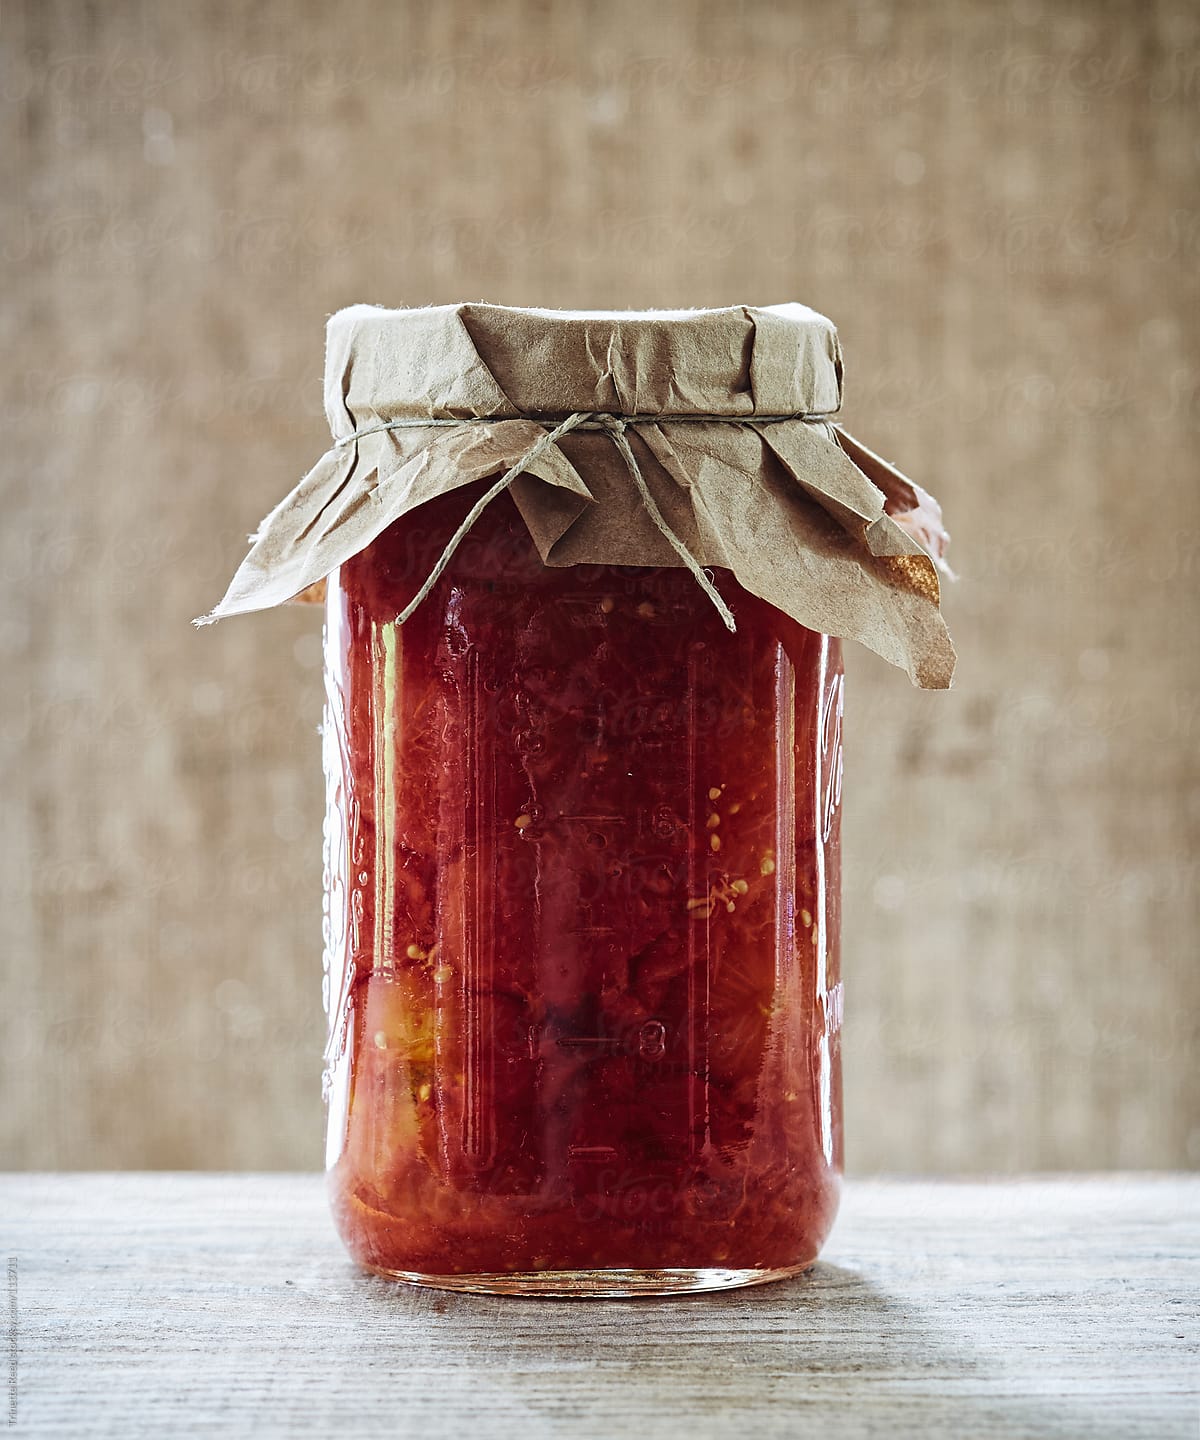 Canned preserved tomato sauce in mason jar